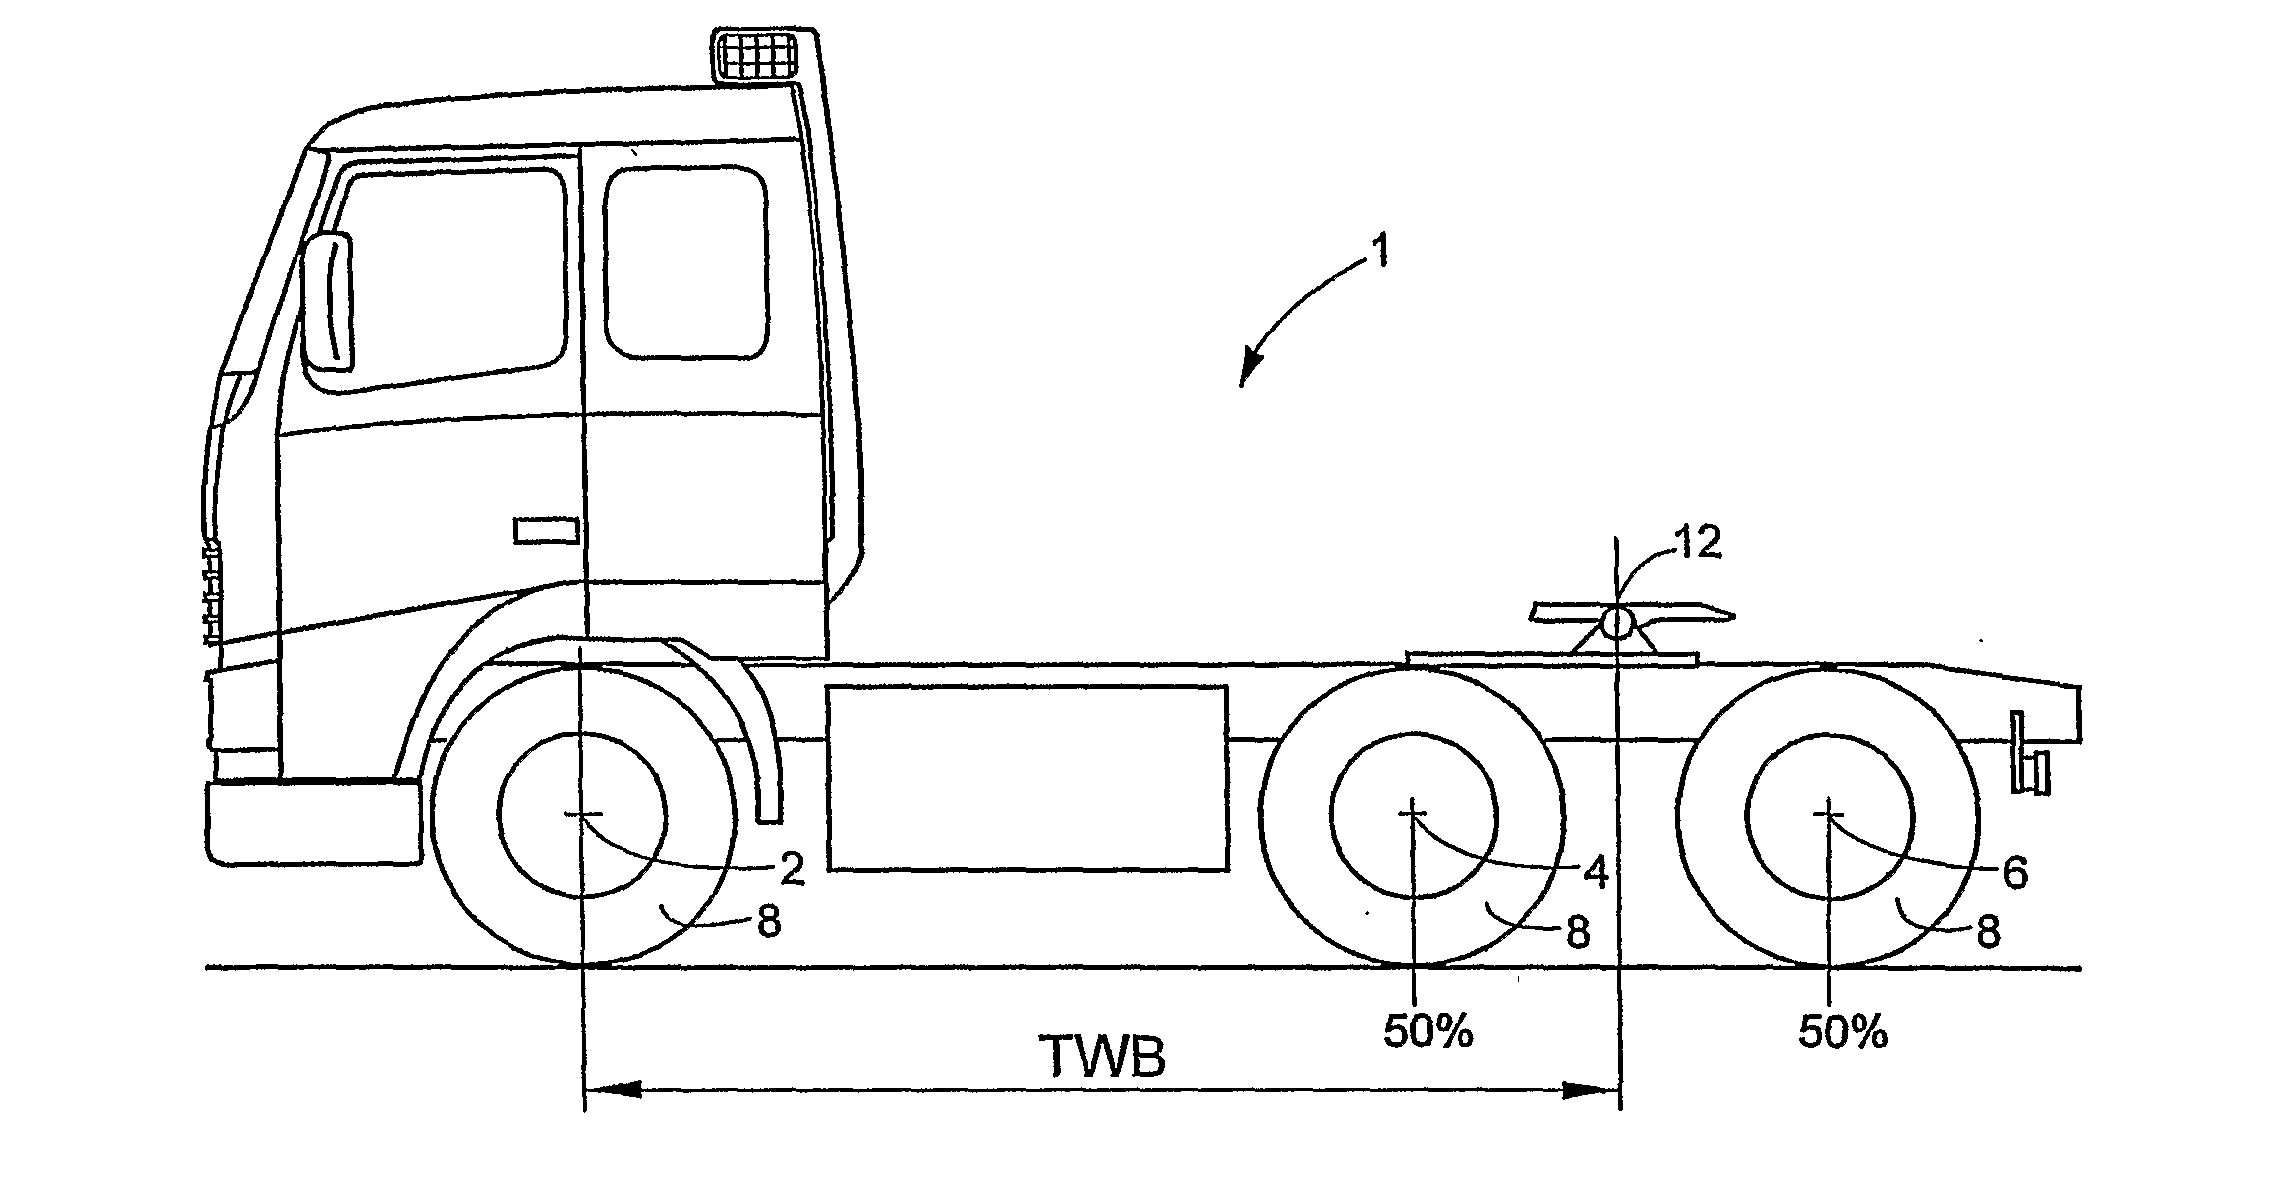 Axle load control system and a wheel base adjustment system